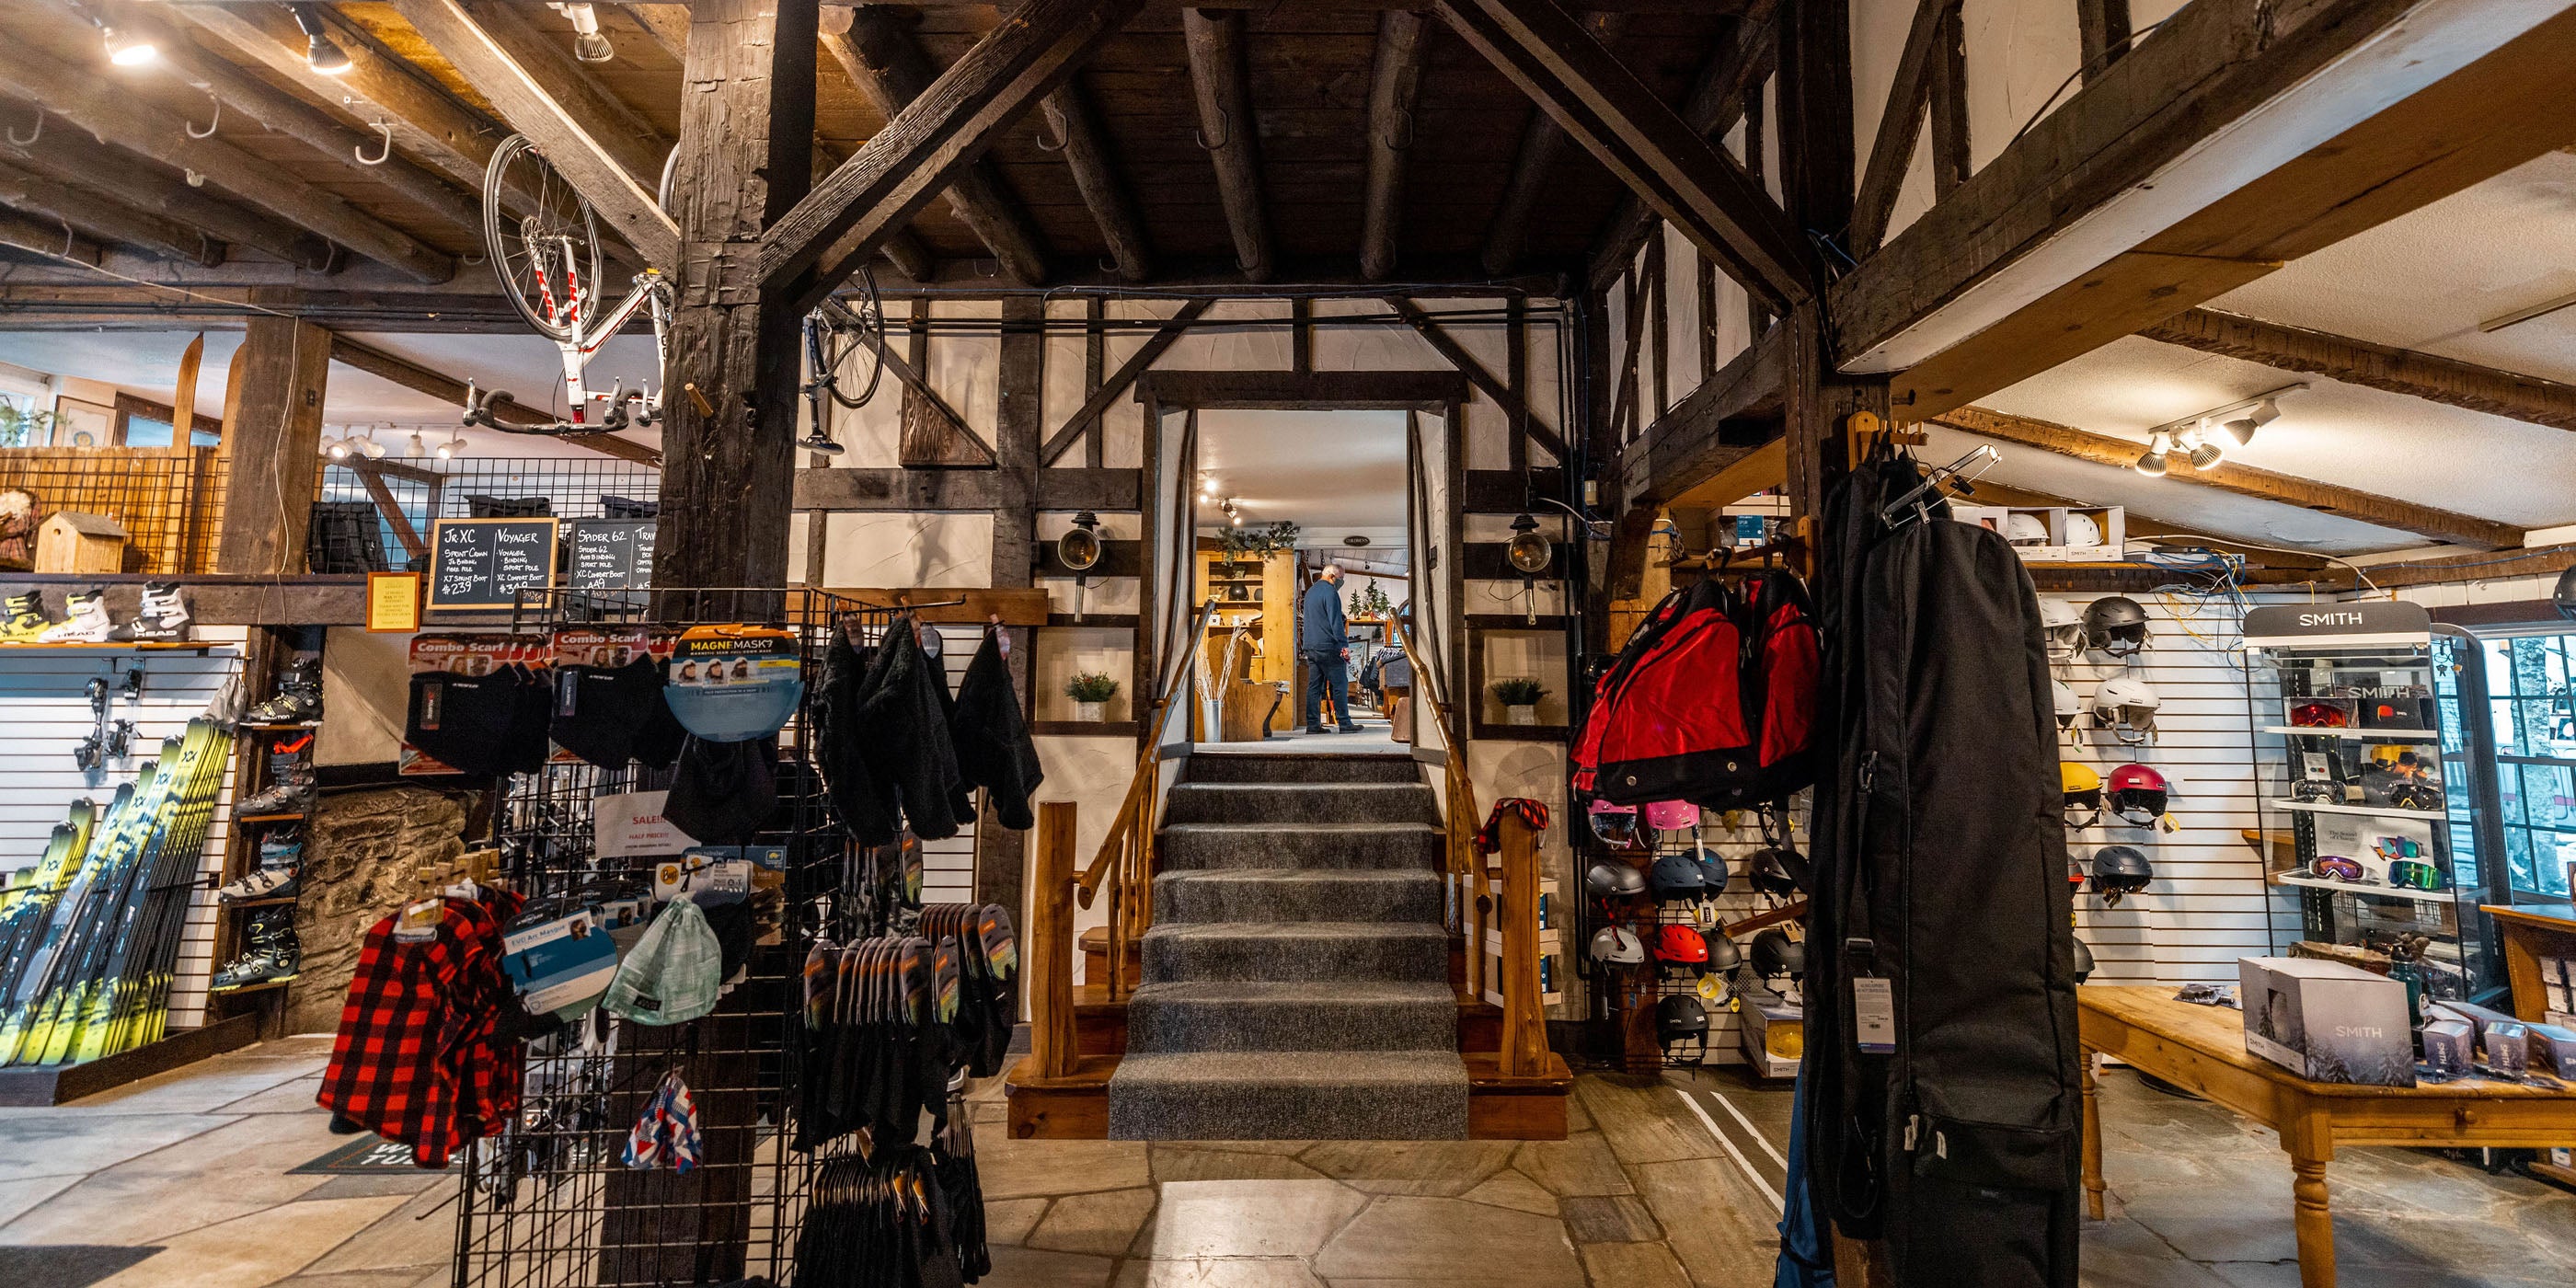 Floor of Kenver ski shop with two vertical wooden beams in the front, and a small stair case in the middle. In the foreground is a display of cold-weather masks. In the left background are skis, while in the right background are ski goggles and helmets.